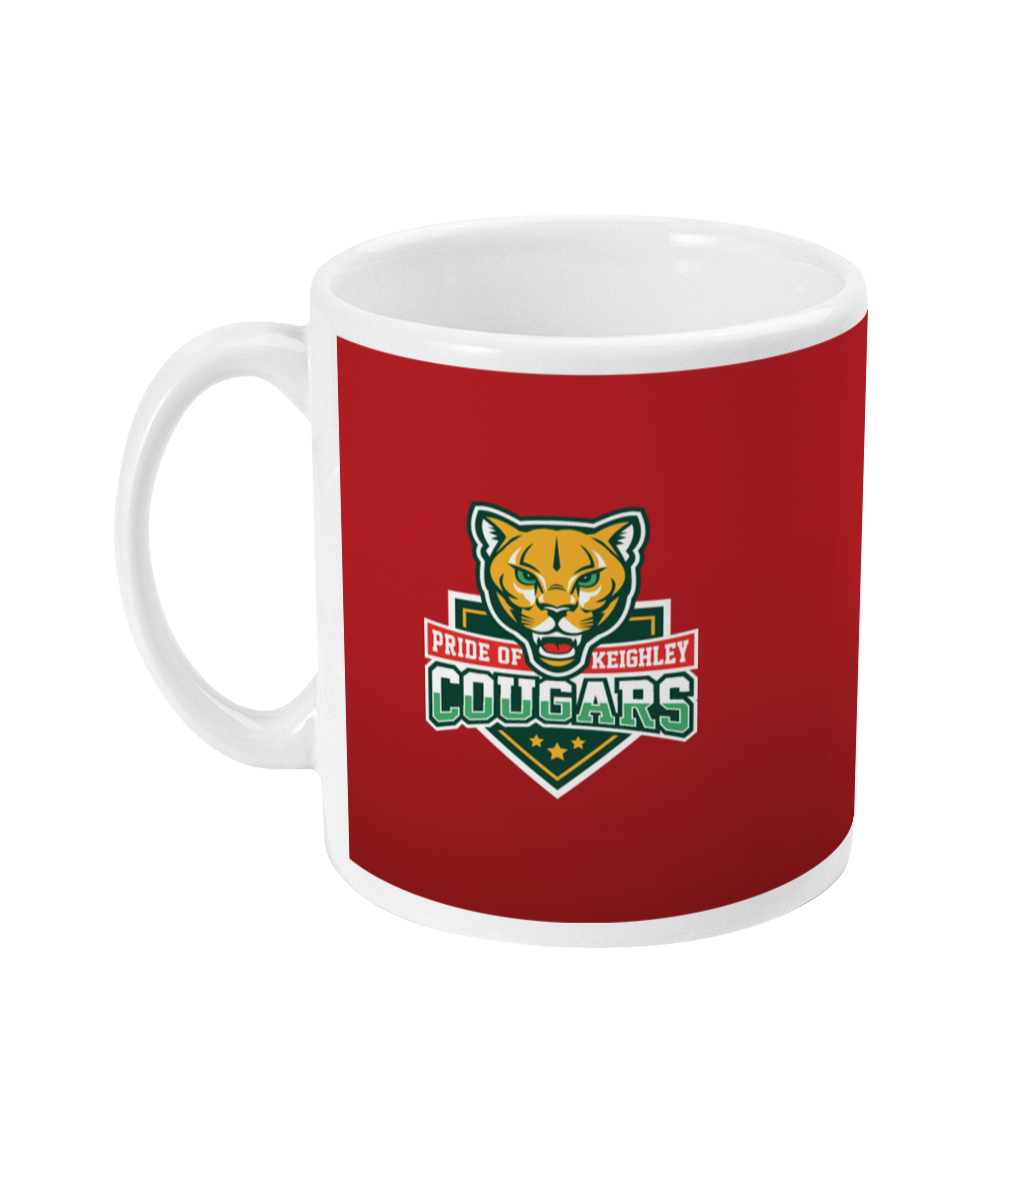 Keighley Cougars Red Crest Mug